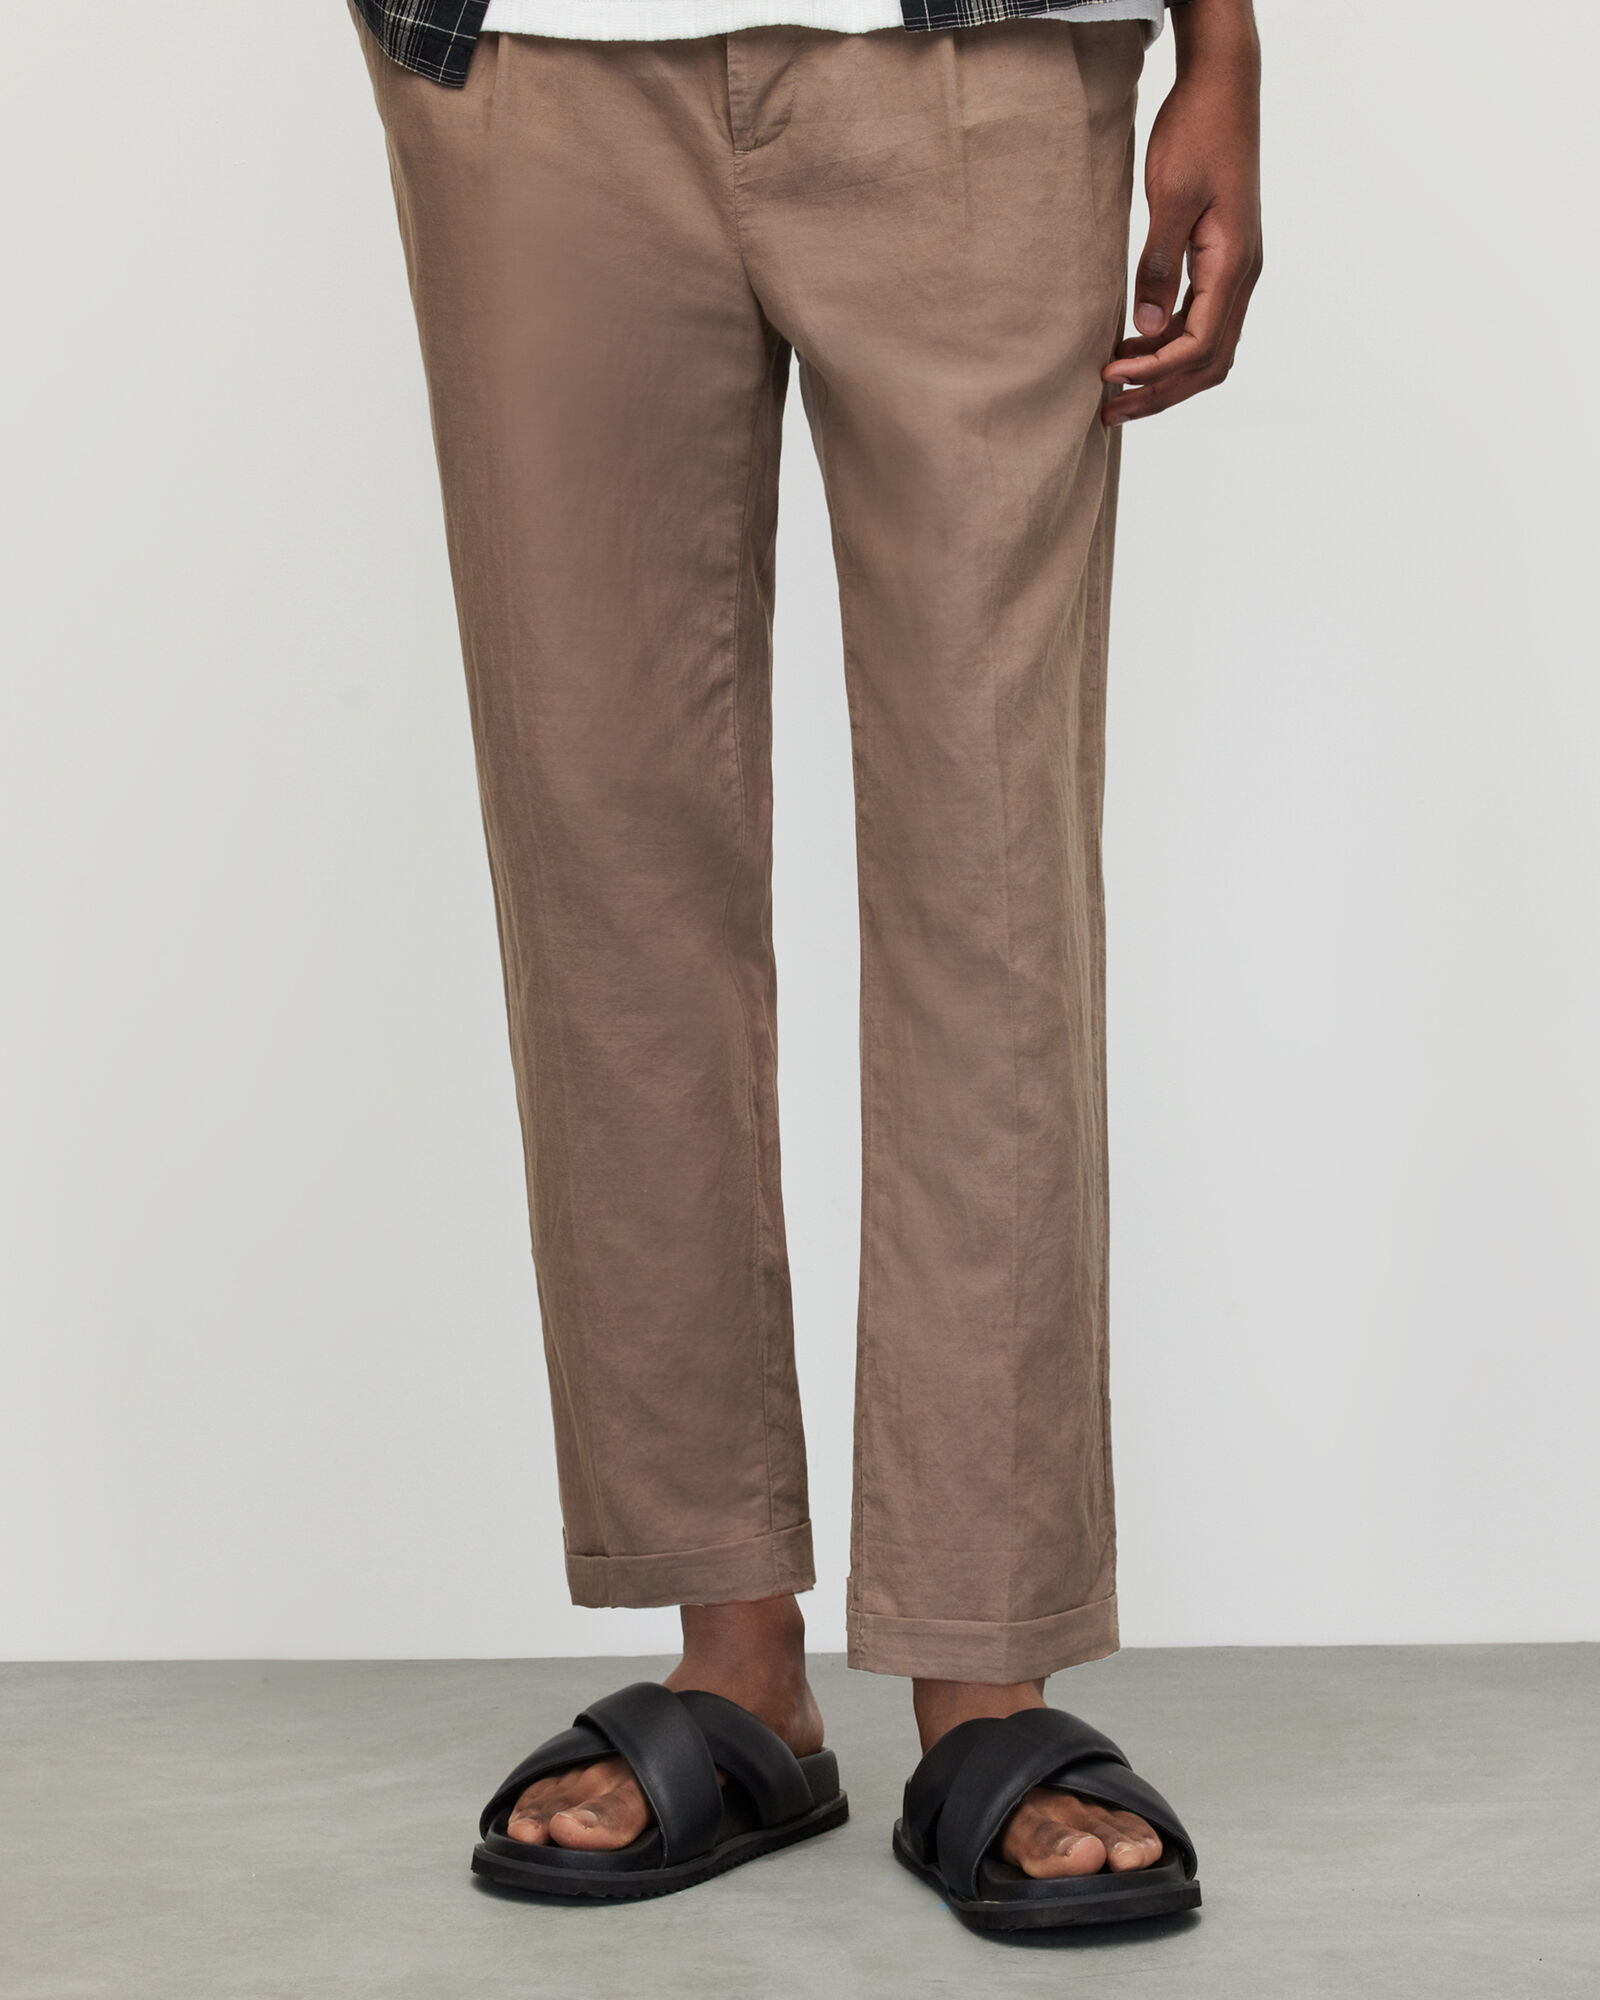 Mens Tailored Trousers  Tailored Trousers for Men  ALLSAINTS